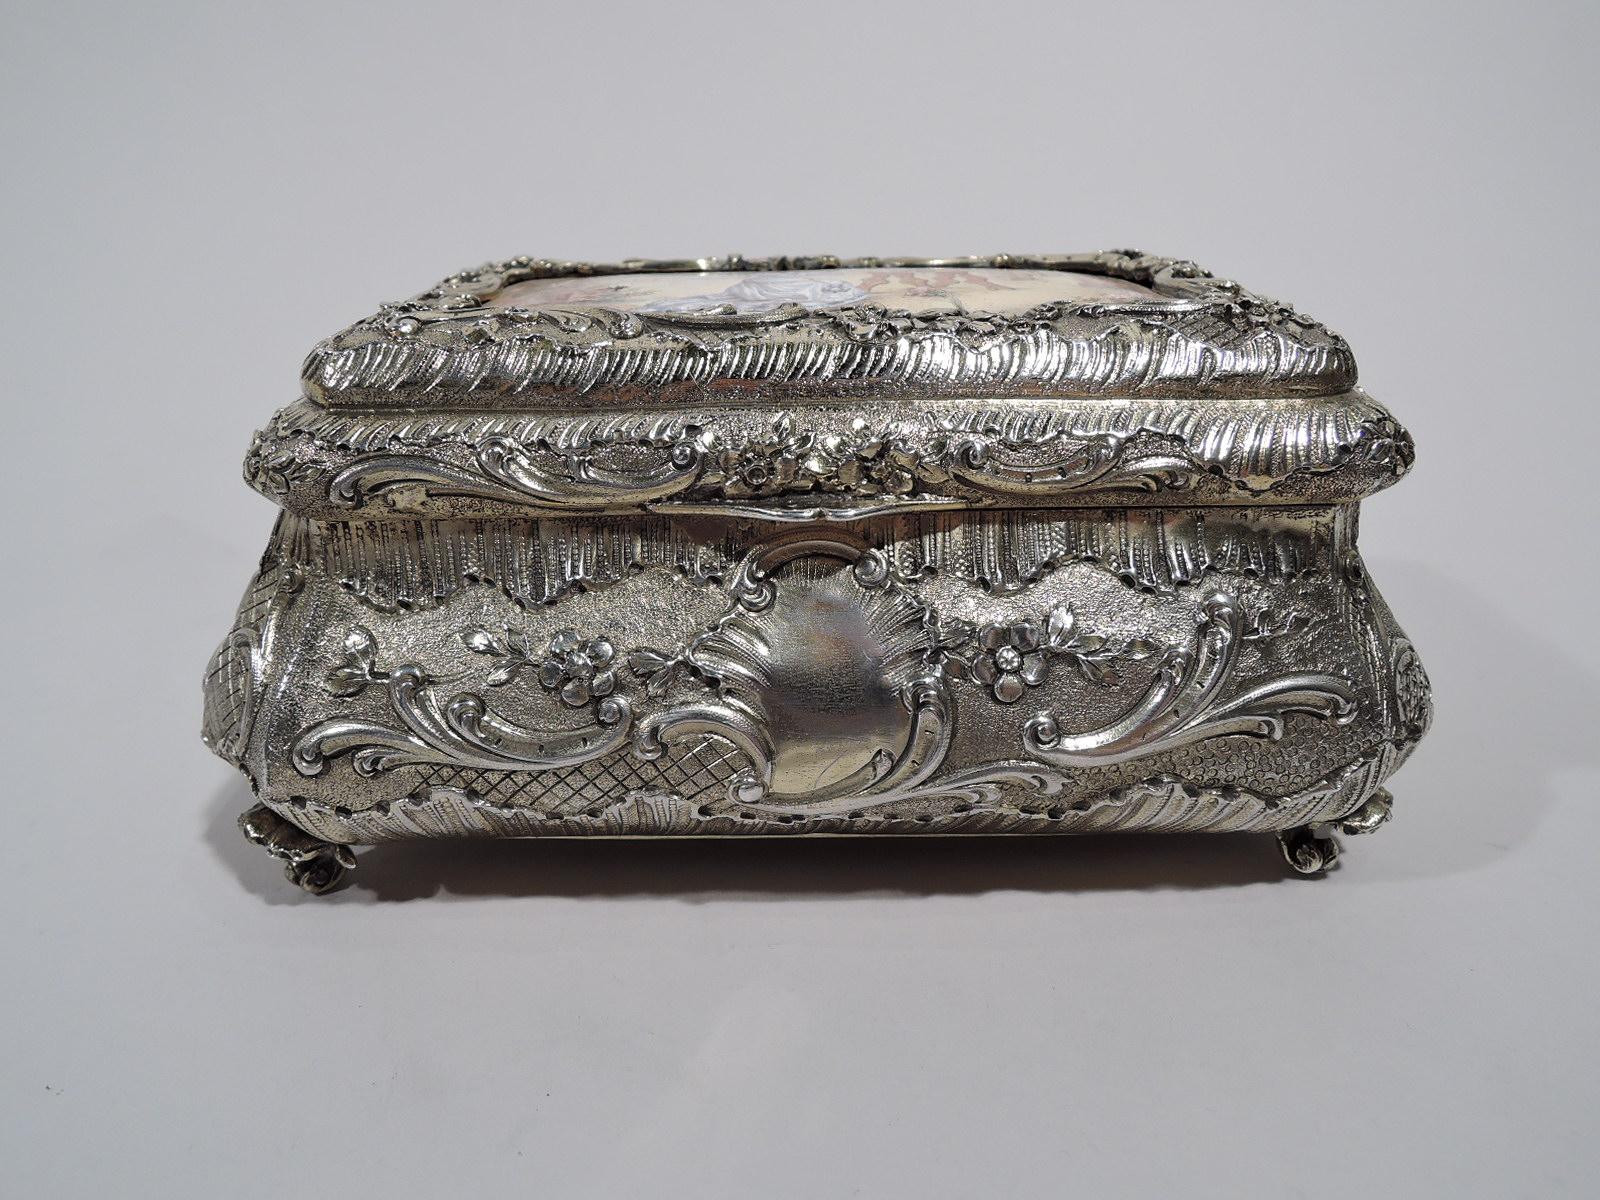 French gilt 950 silver casket, circa 1900. Bombe with chased scrolls and flowers on granulated and diaper ground. On front, asymmetrical cartouche (vacant). Four scrolled corner supports. Cover hinged and raised and inset with enamel plaque